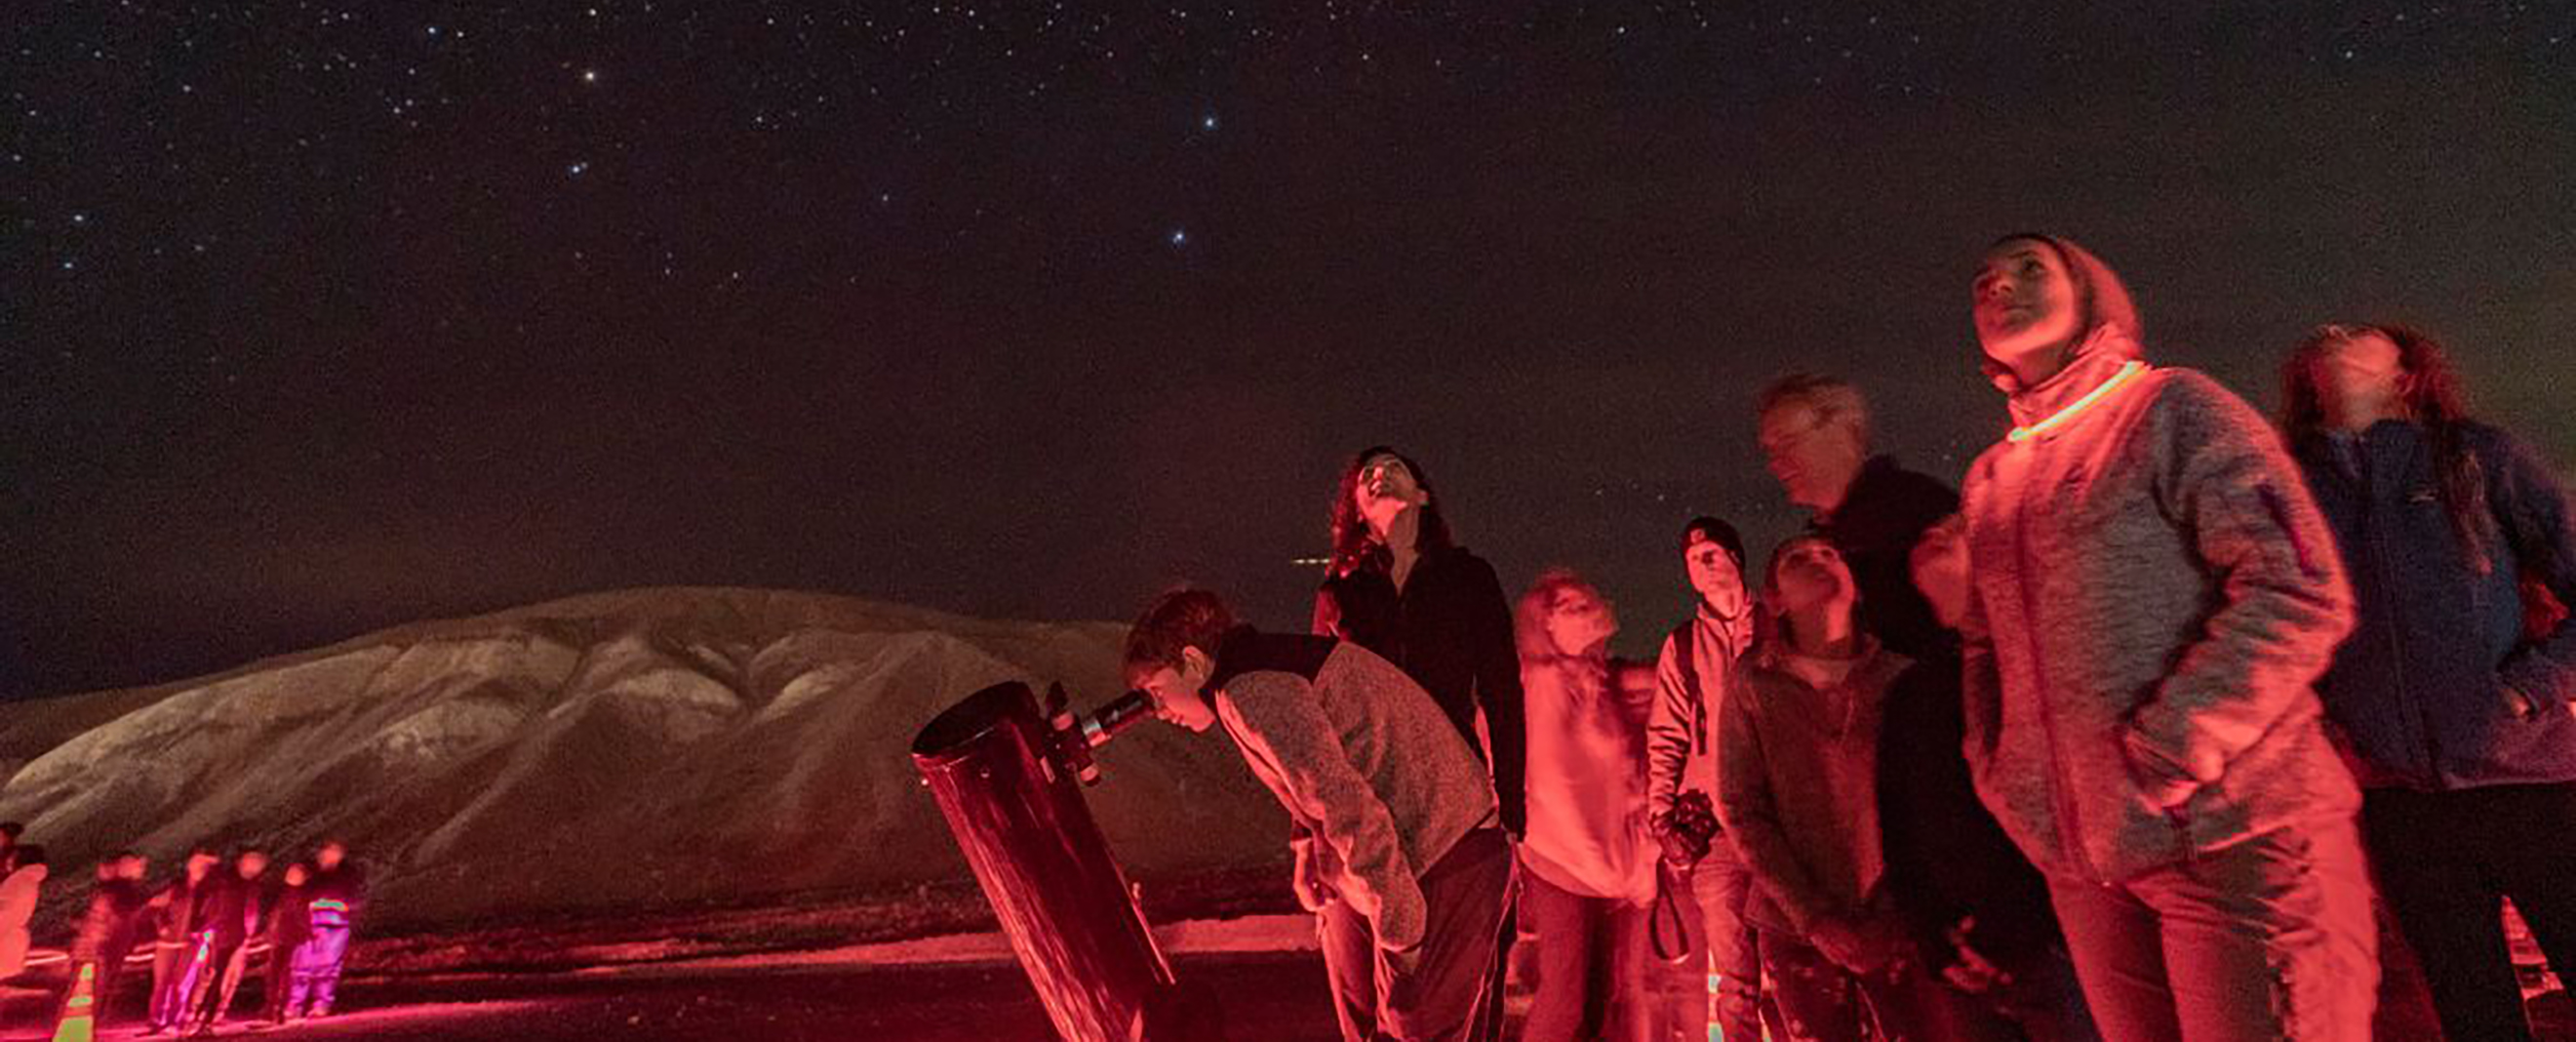 Visitors looking through a Newtonian telescope and staring at a sky full of stars surrounded by red light.